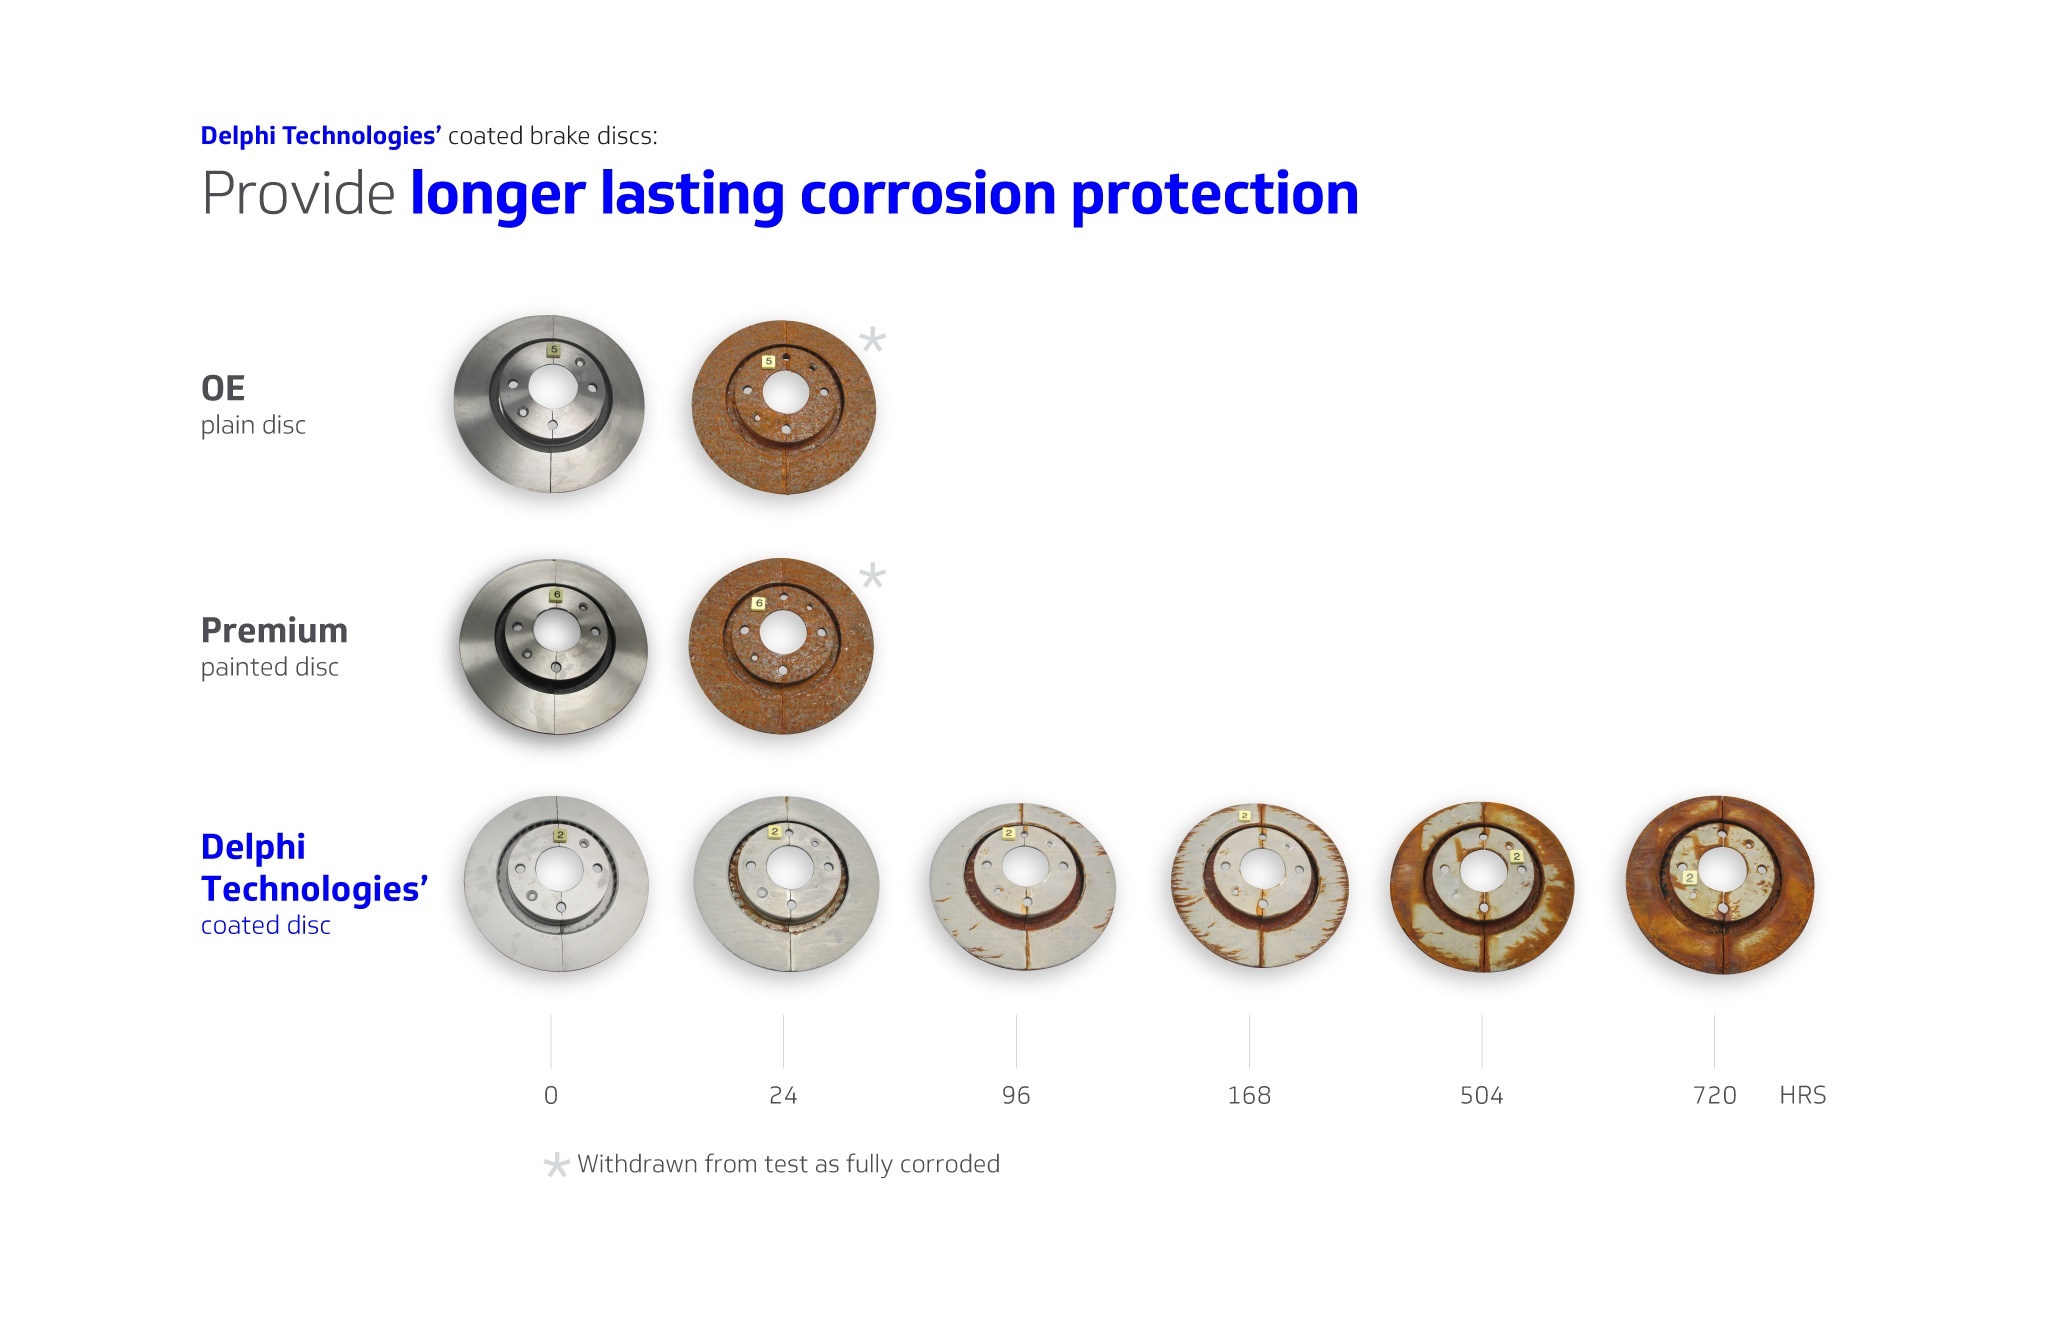 Delphi Technologies’ coated brake discs provide longer lasting corrosion protection than competition